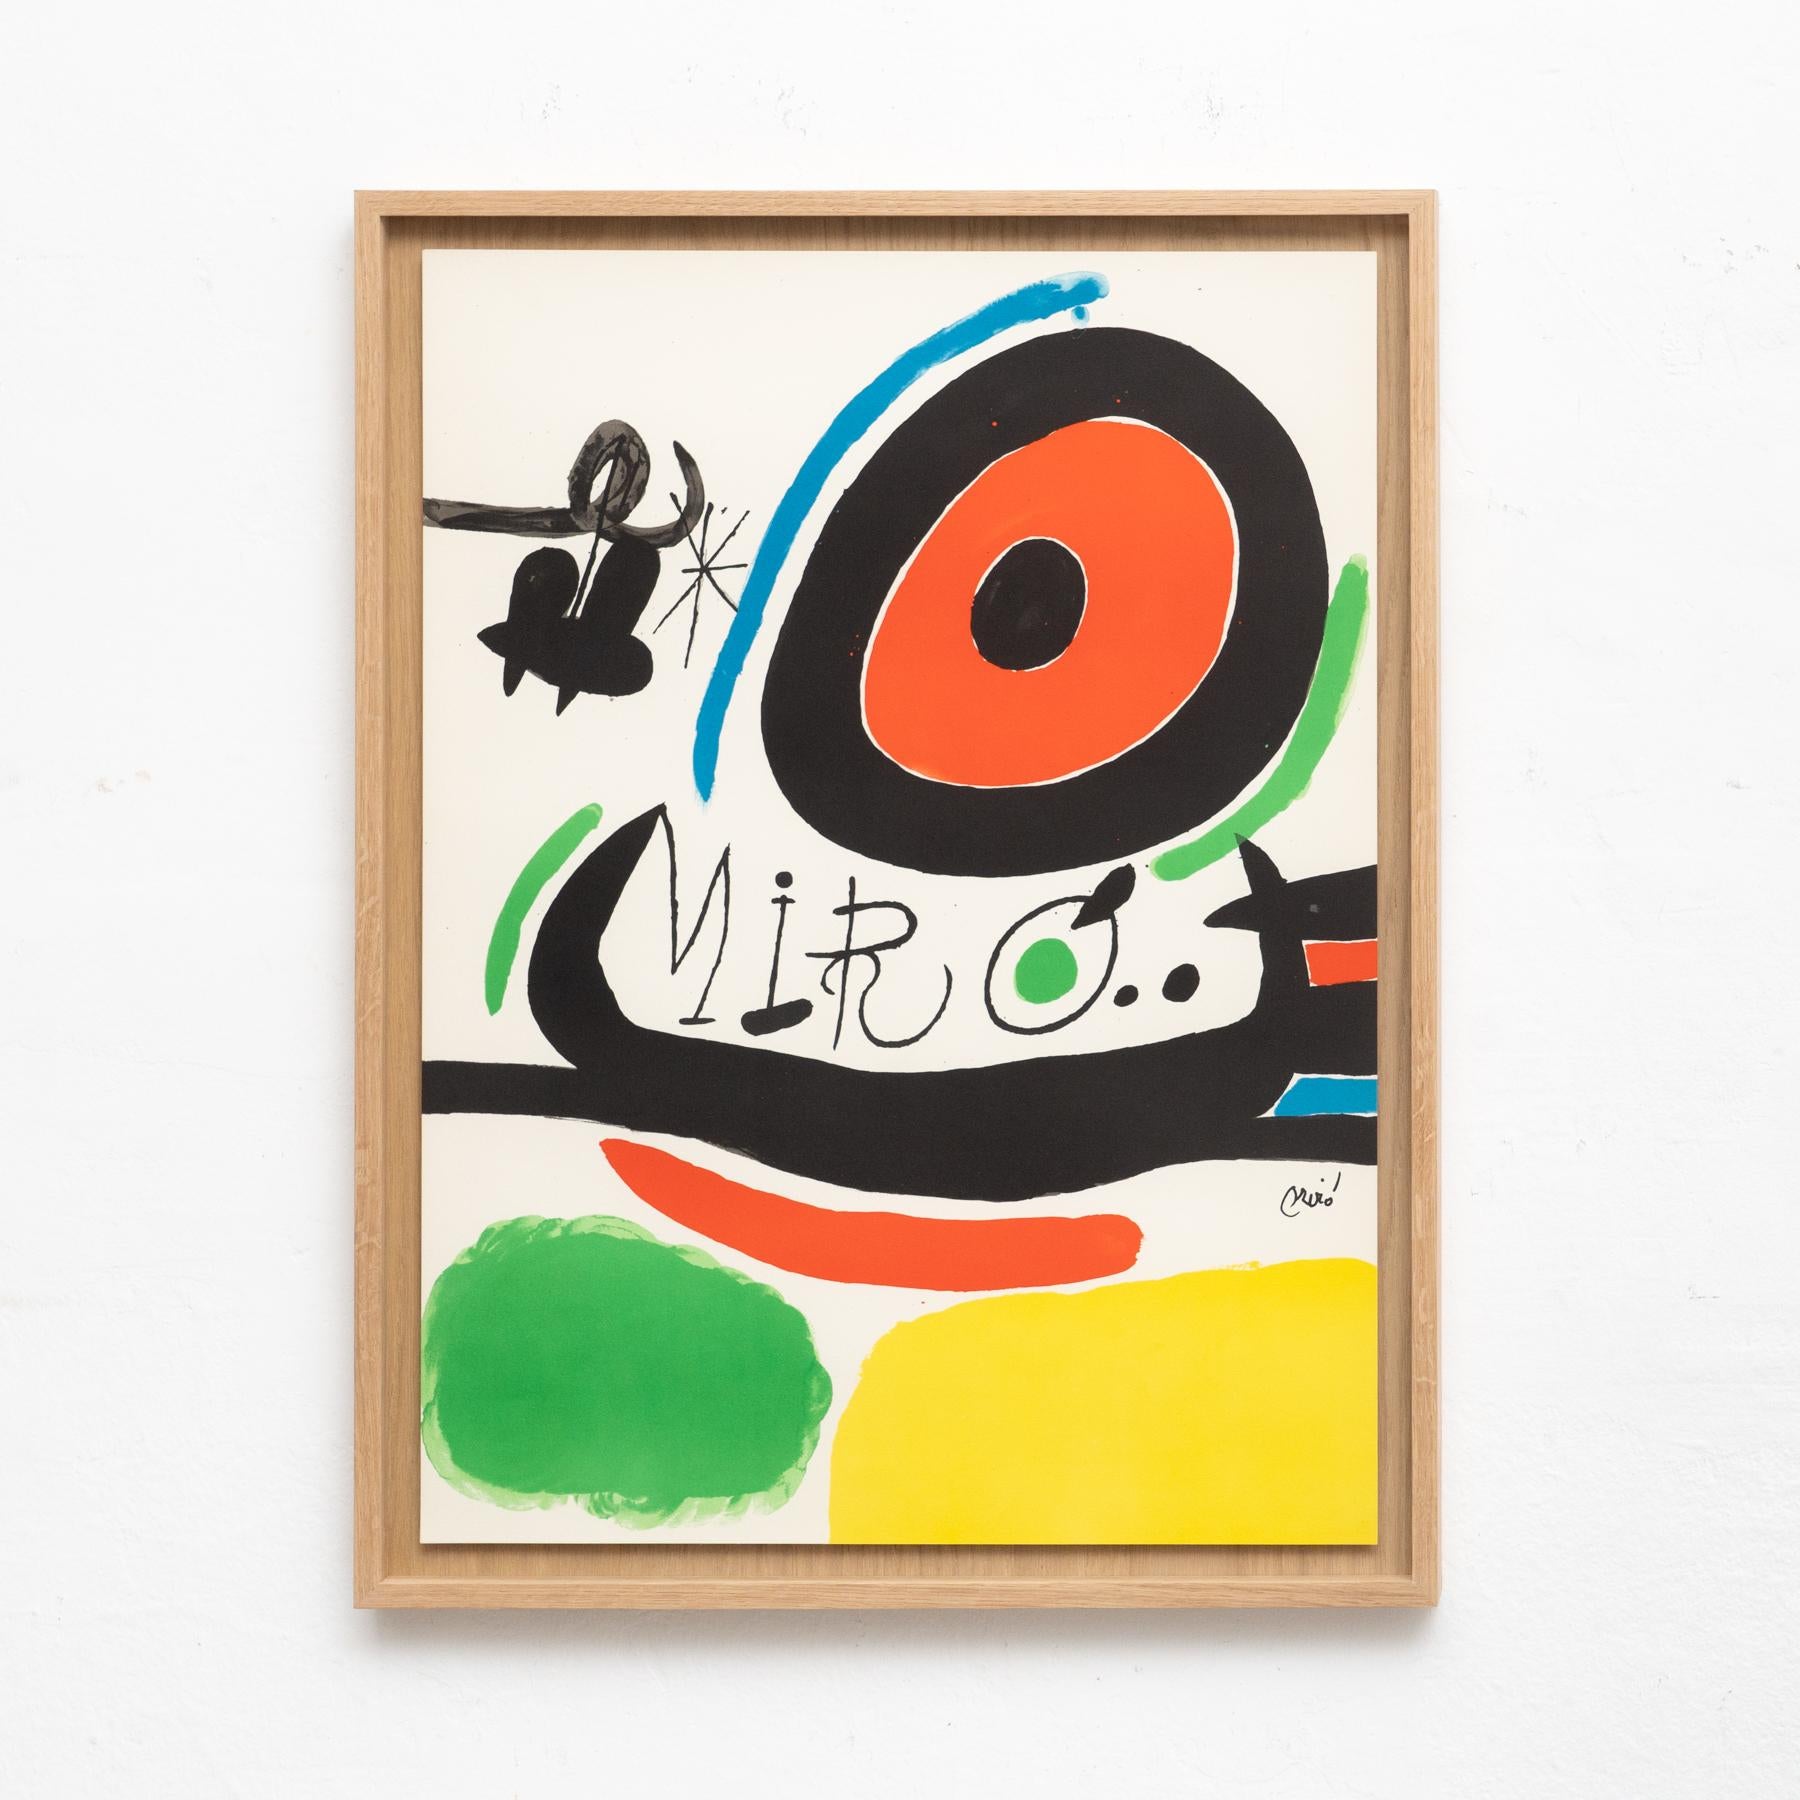 Lithography by Joan Miro, 1970. Edited by Poligrafa (Spain). 

Guarro Paper, numbered and monogrammed. 

Limited edition 500 Provenance: Barcelona (Spain).

Framed in Barcelona by a local artisan in natural fine wood.

In original condition,